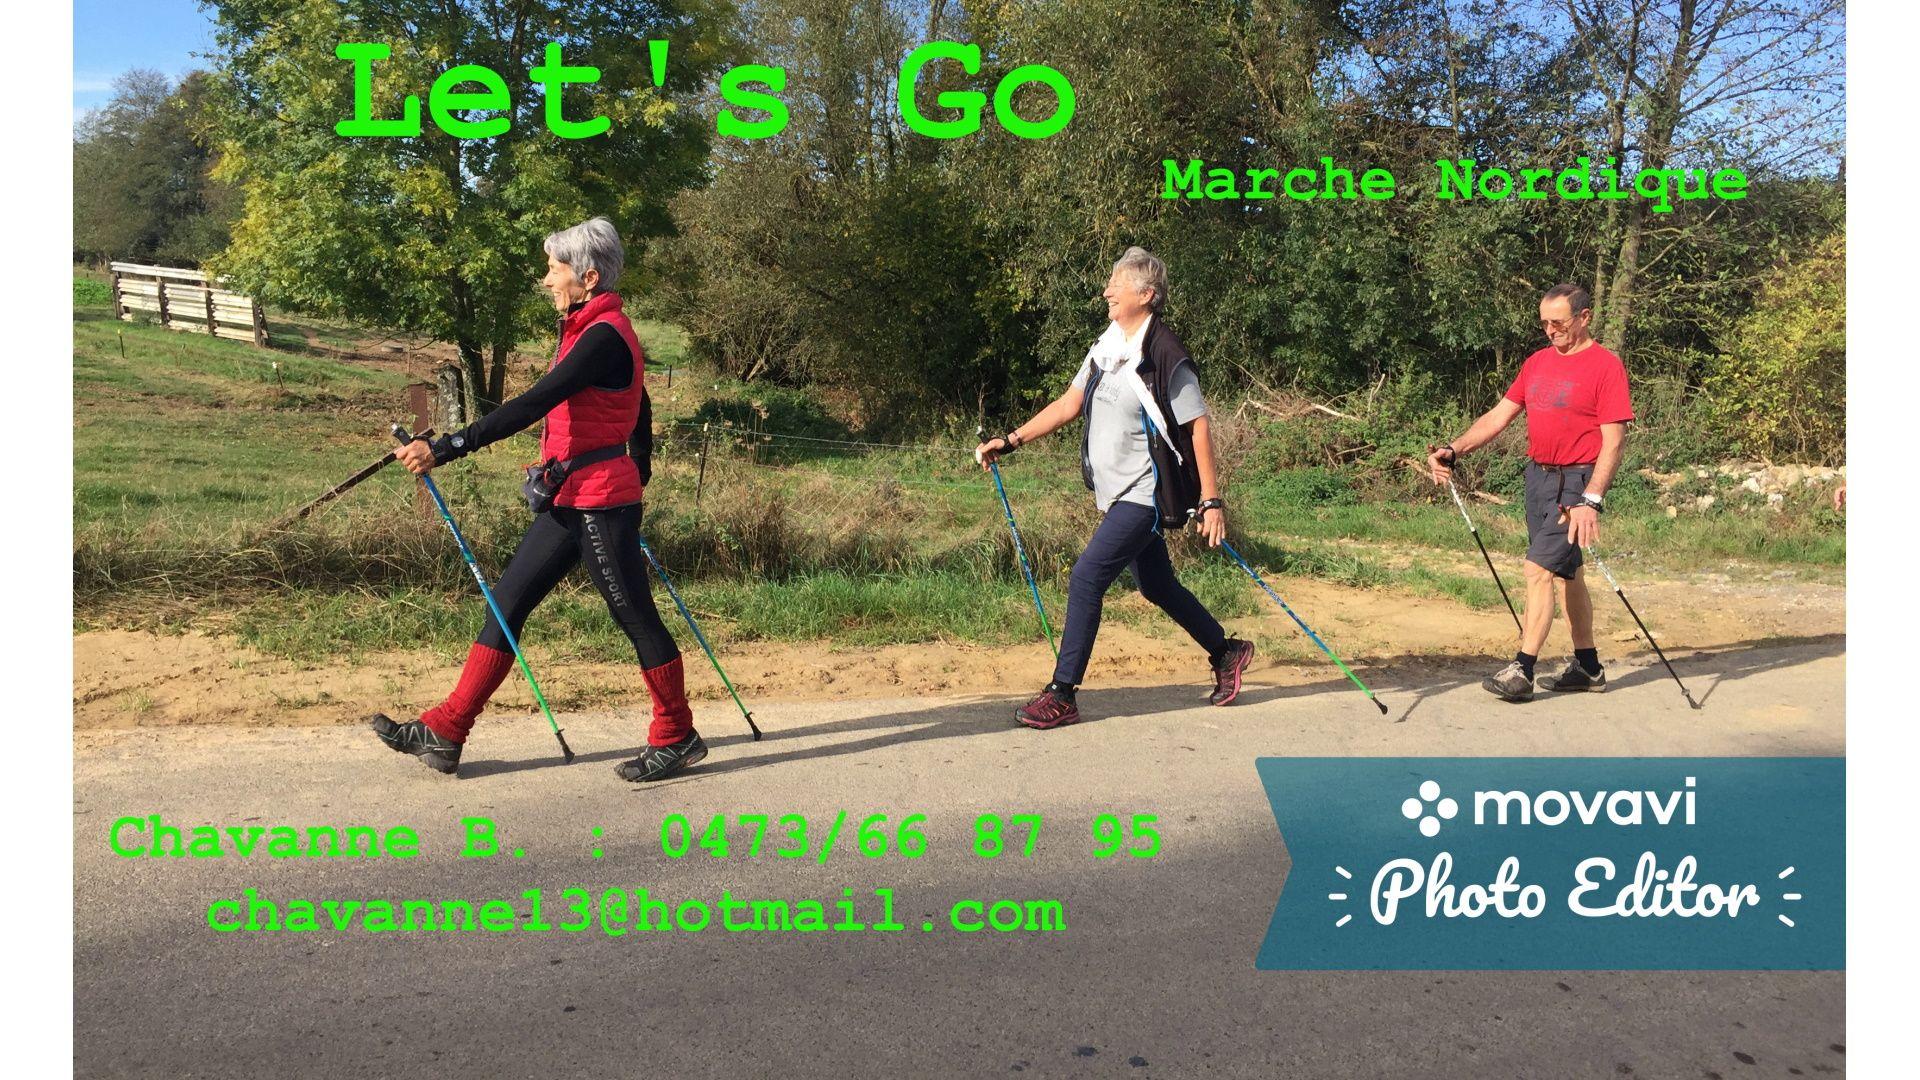 Marche nordique - Nordic Walking assorti d'exercices fitness